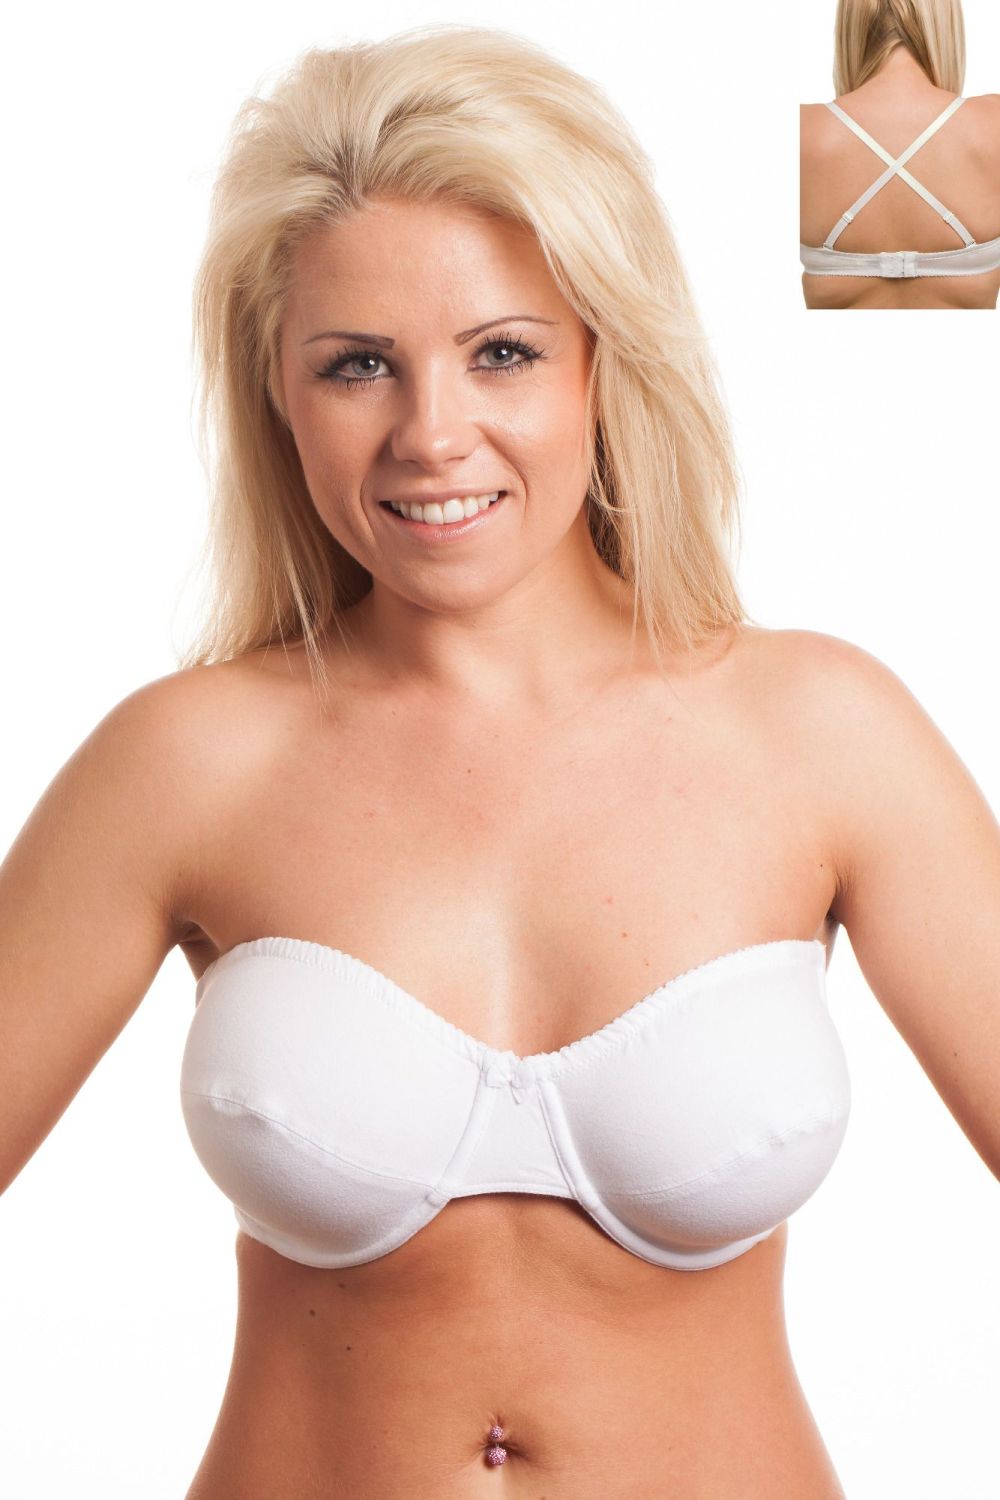 MW295 - 30 COTTON Strapless Bras - only £5 Each